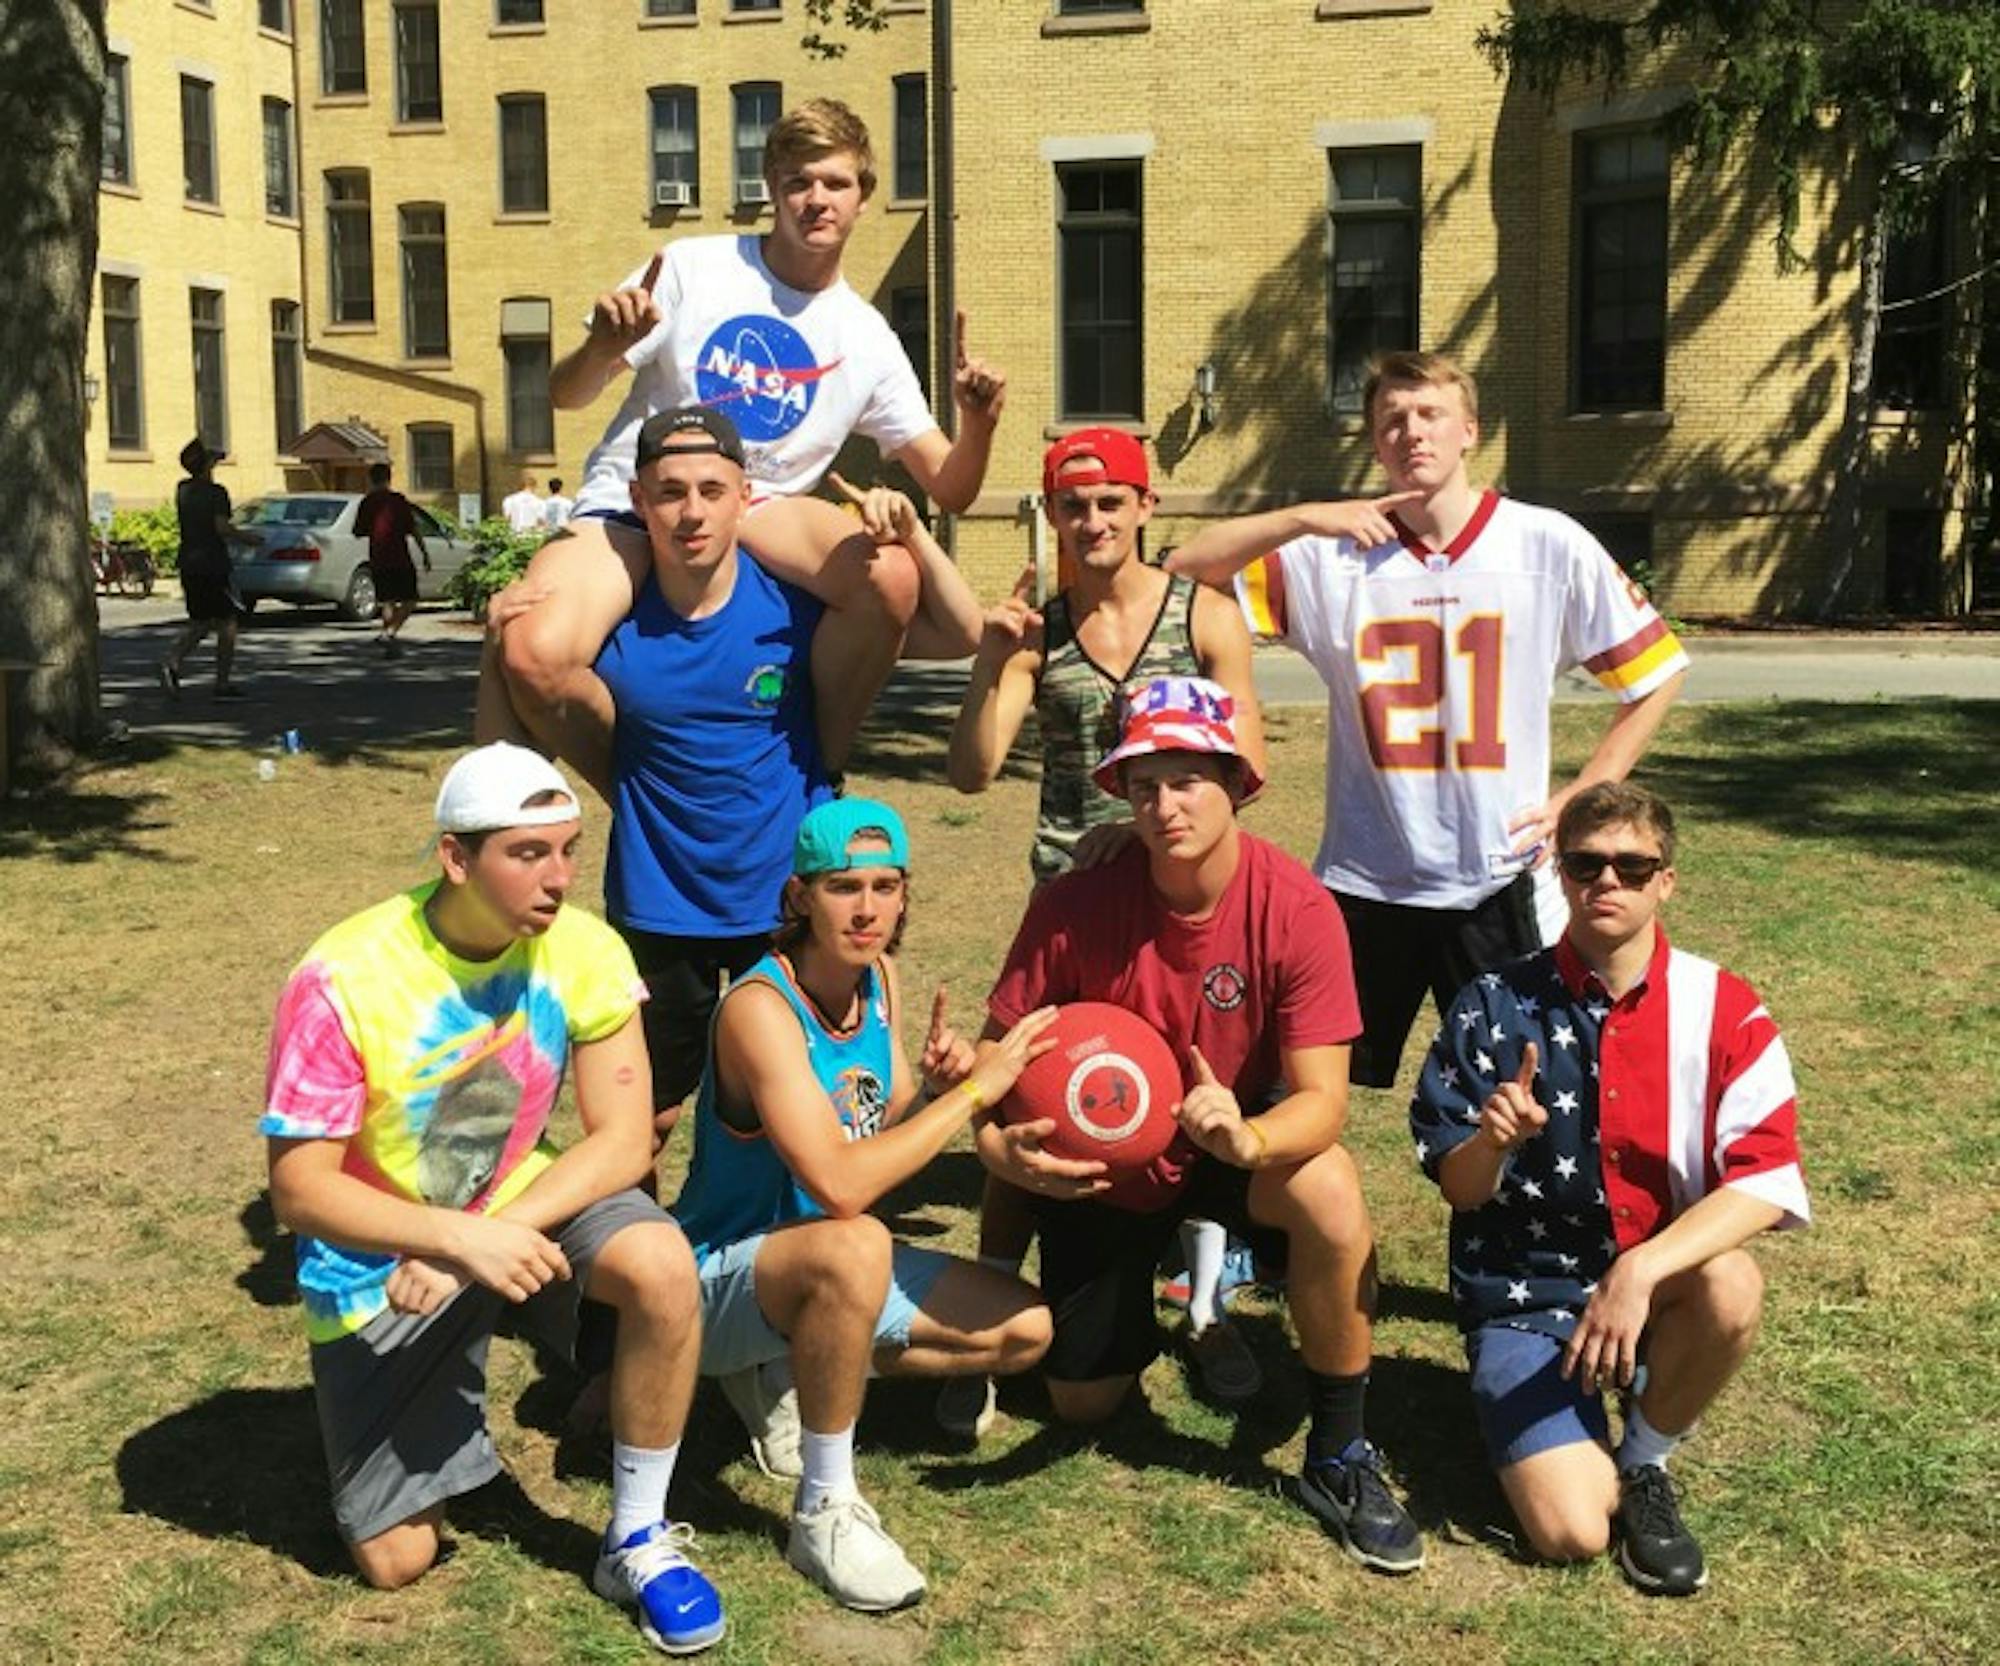 The off-campus senior team poses after winning Kick-It for Kevin, the annual charity kickball tournament hosted by Sorin College. Eighteen student teams competed Saturday in the tournament in its seventh year.